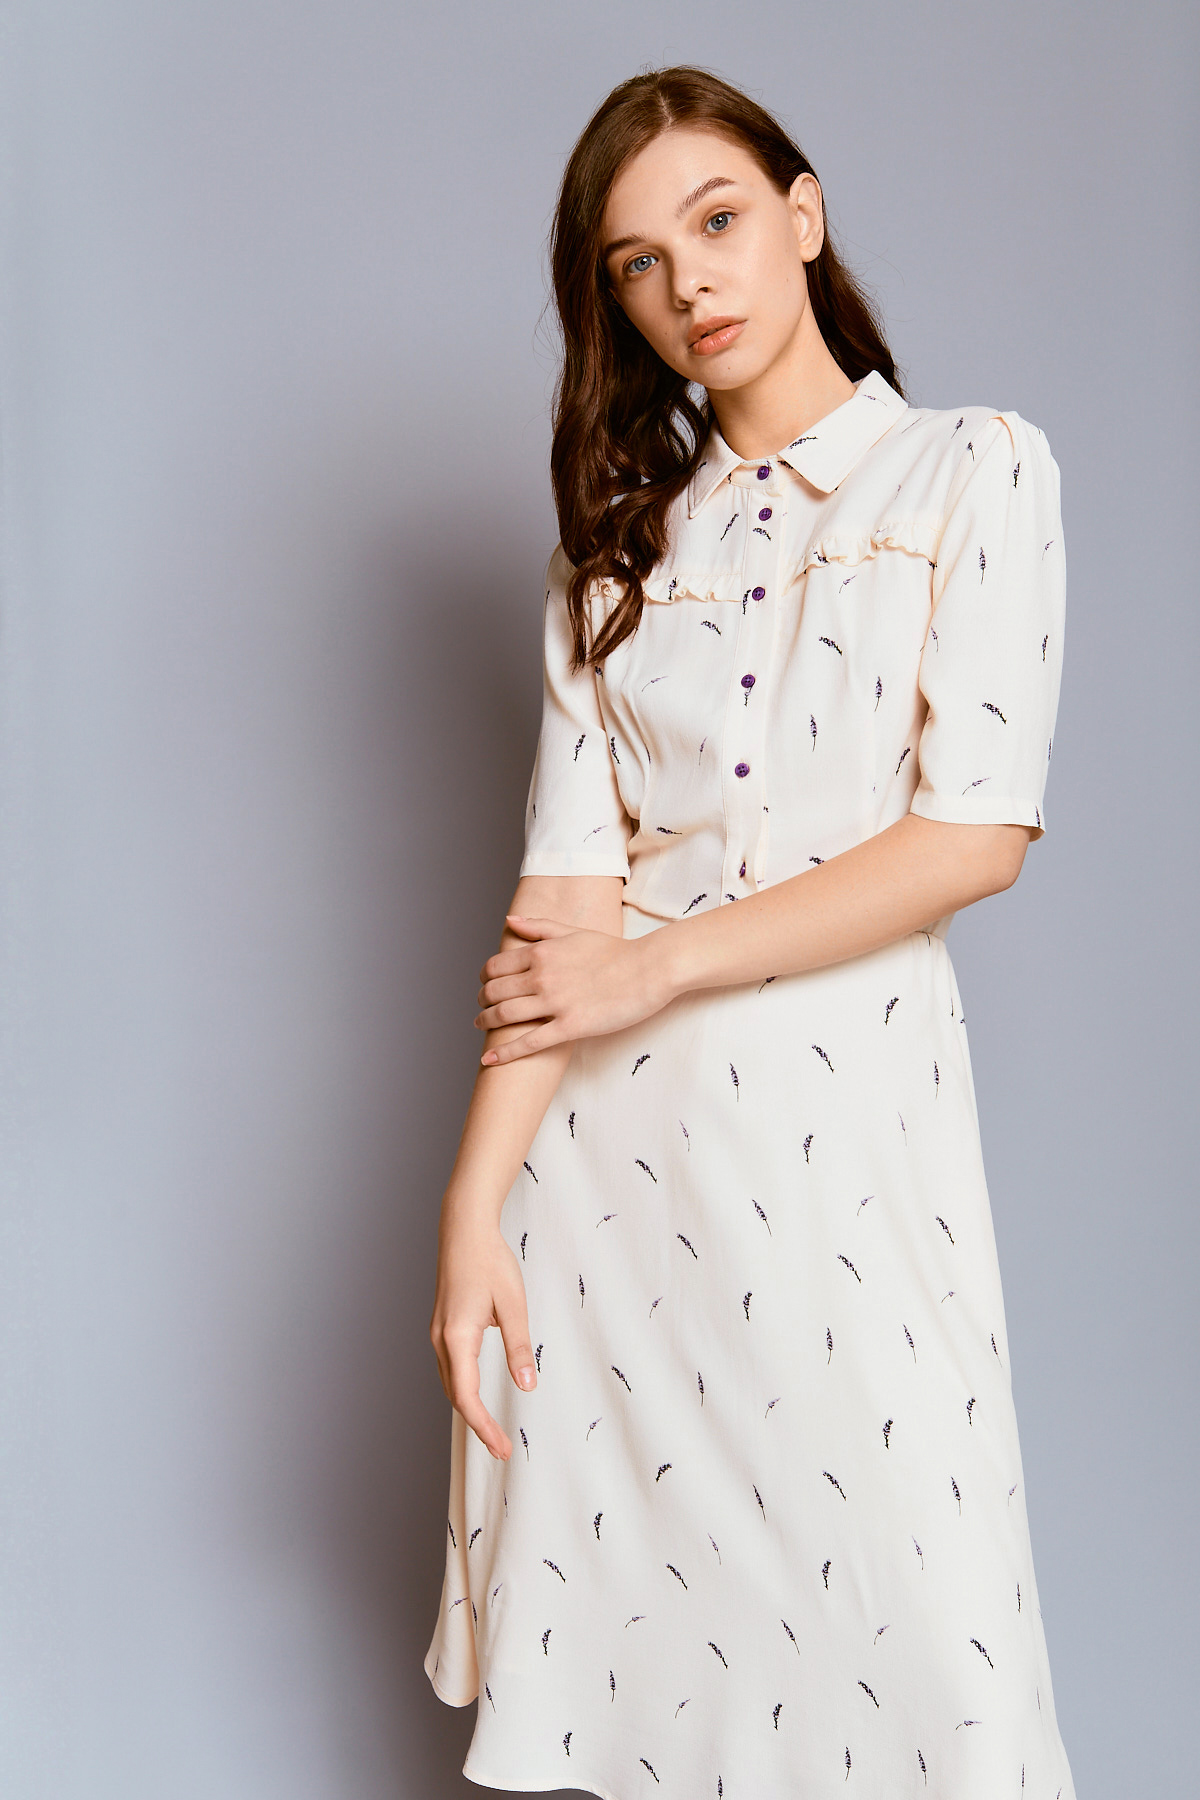 Peach-colored dress with a lavender print and a shirt top, photo 4